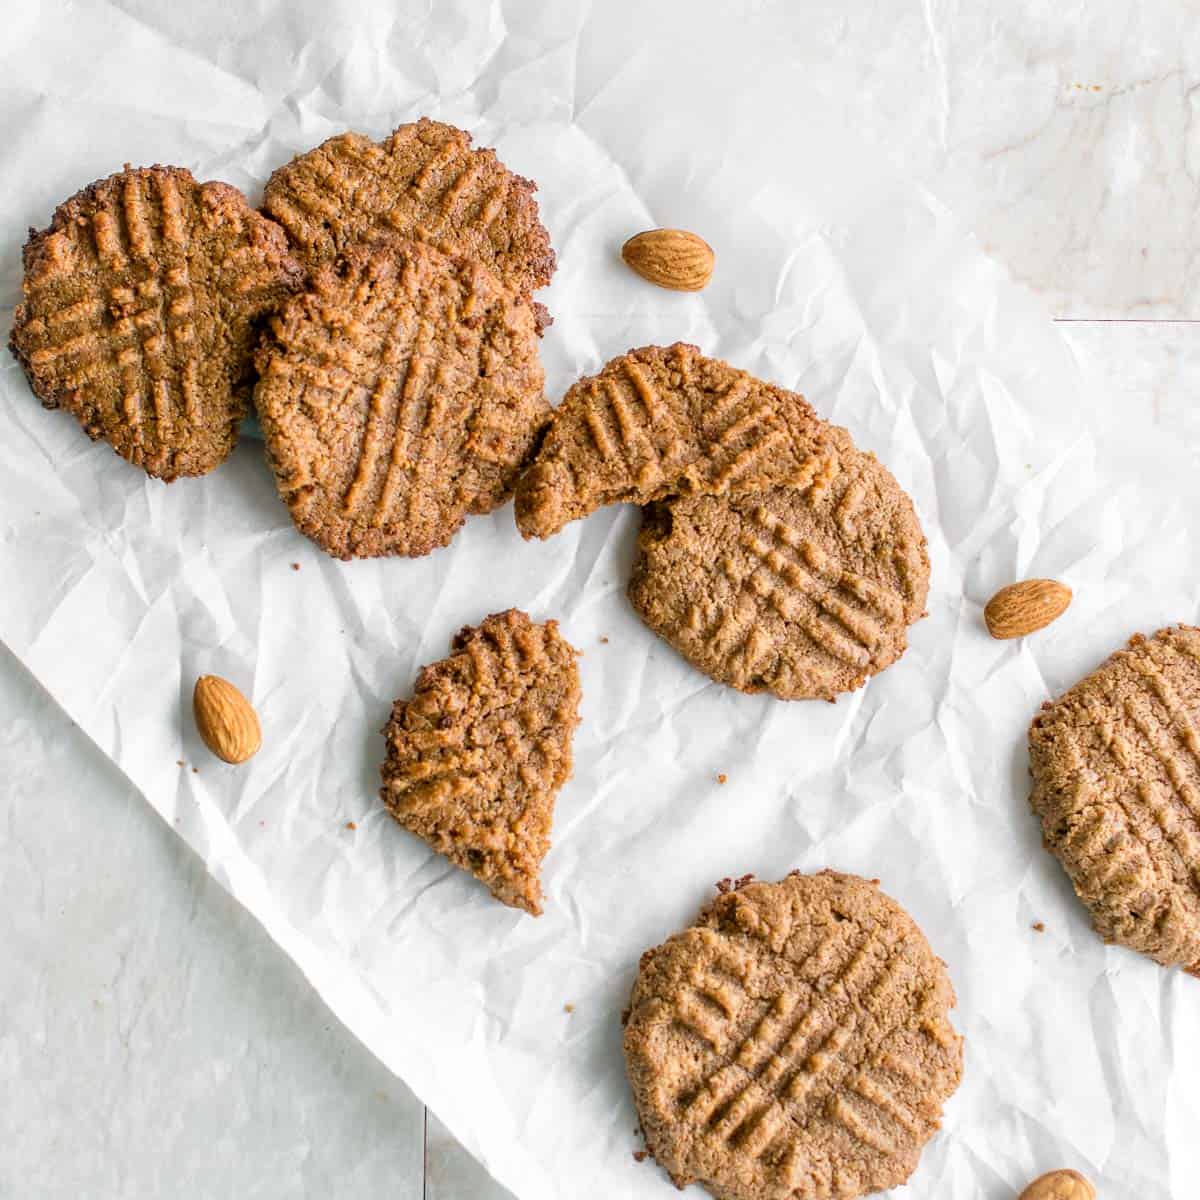 top view of vegan almond butter cookies on a parchment paper.